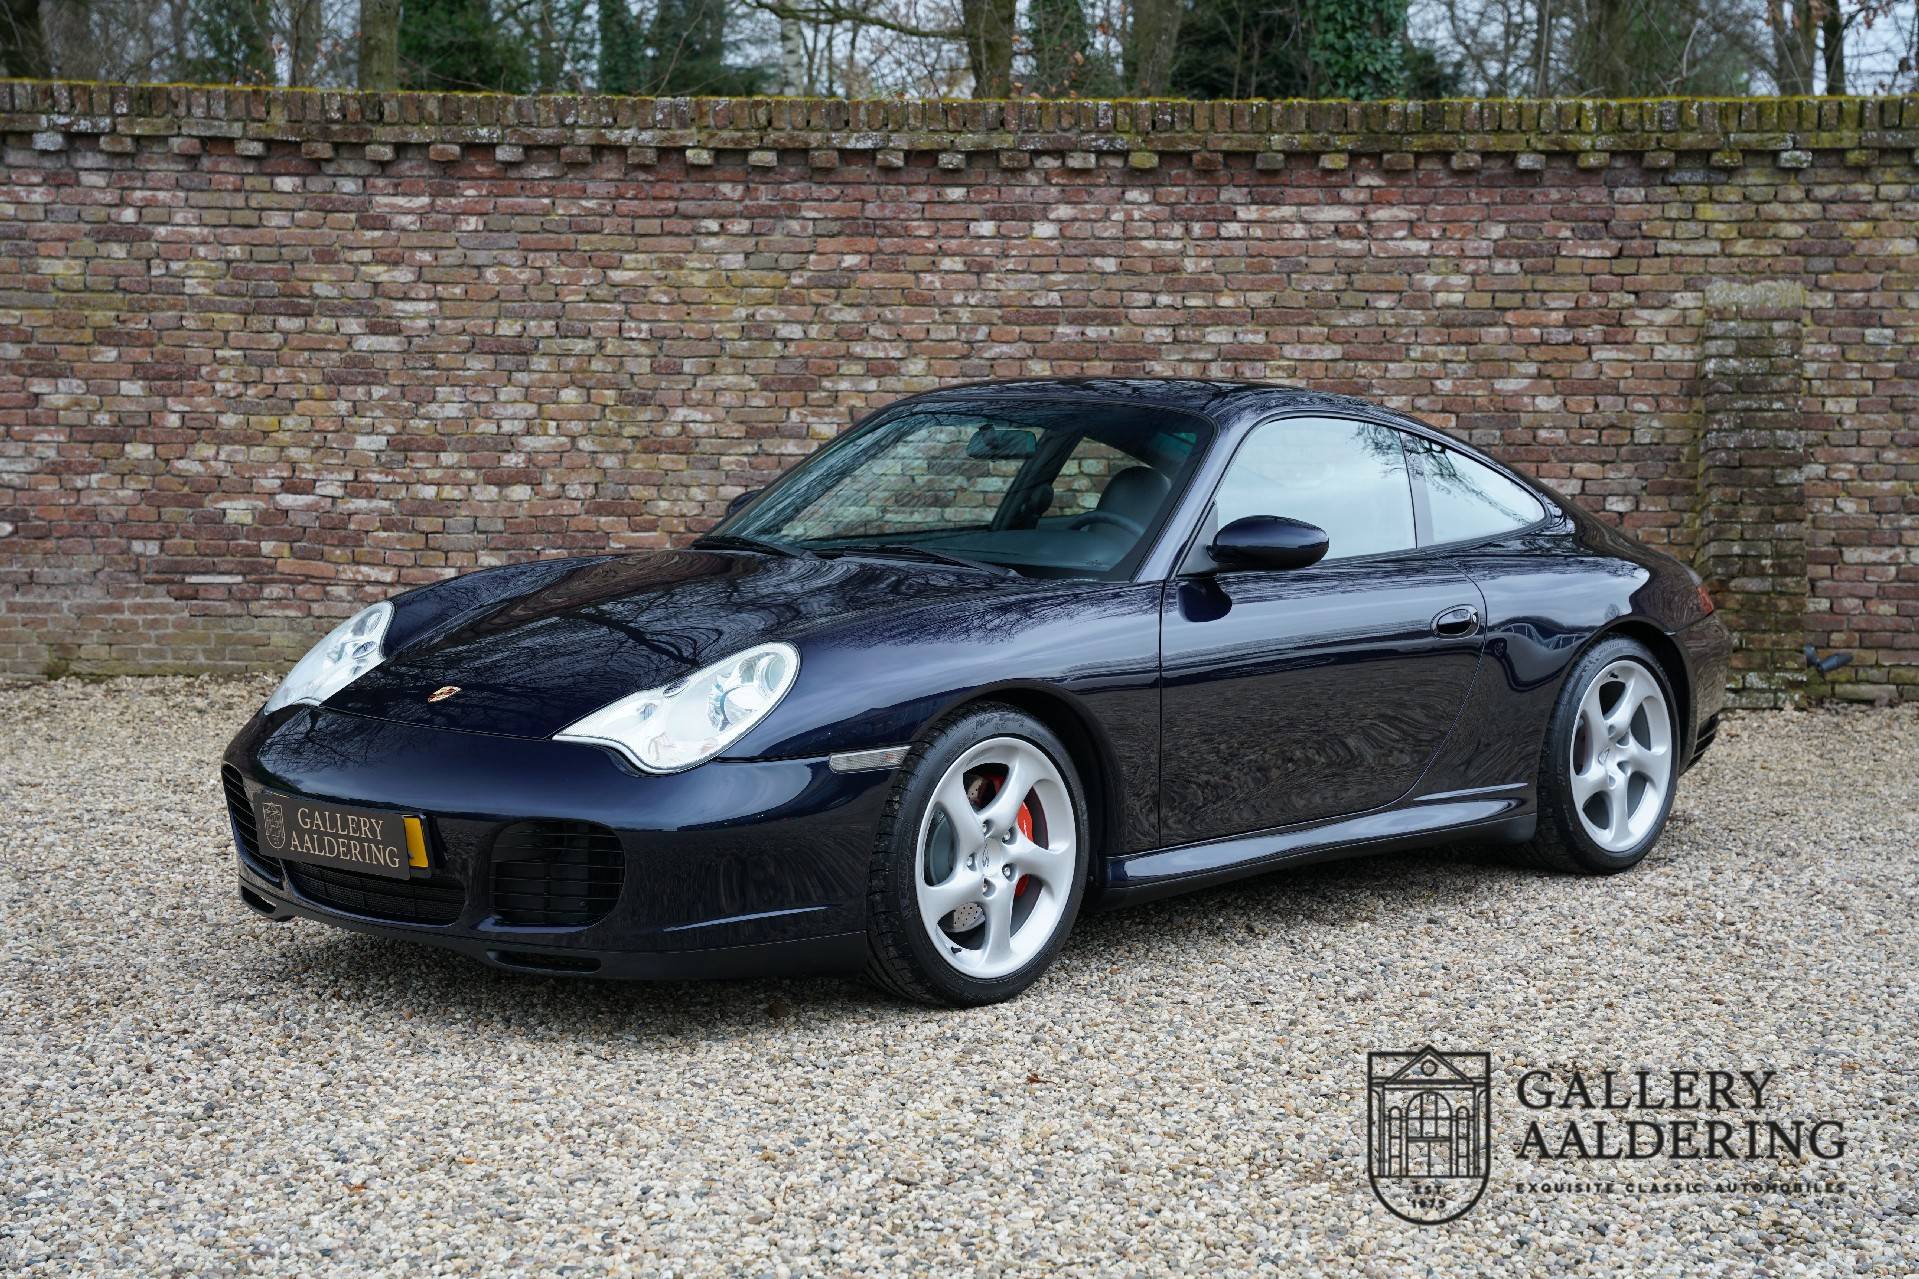 For Sale: Porsche 911 Carrera 4S (2003) offered for $86,290